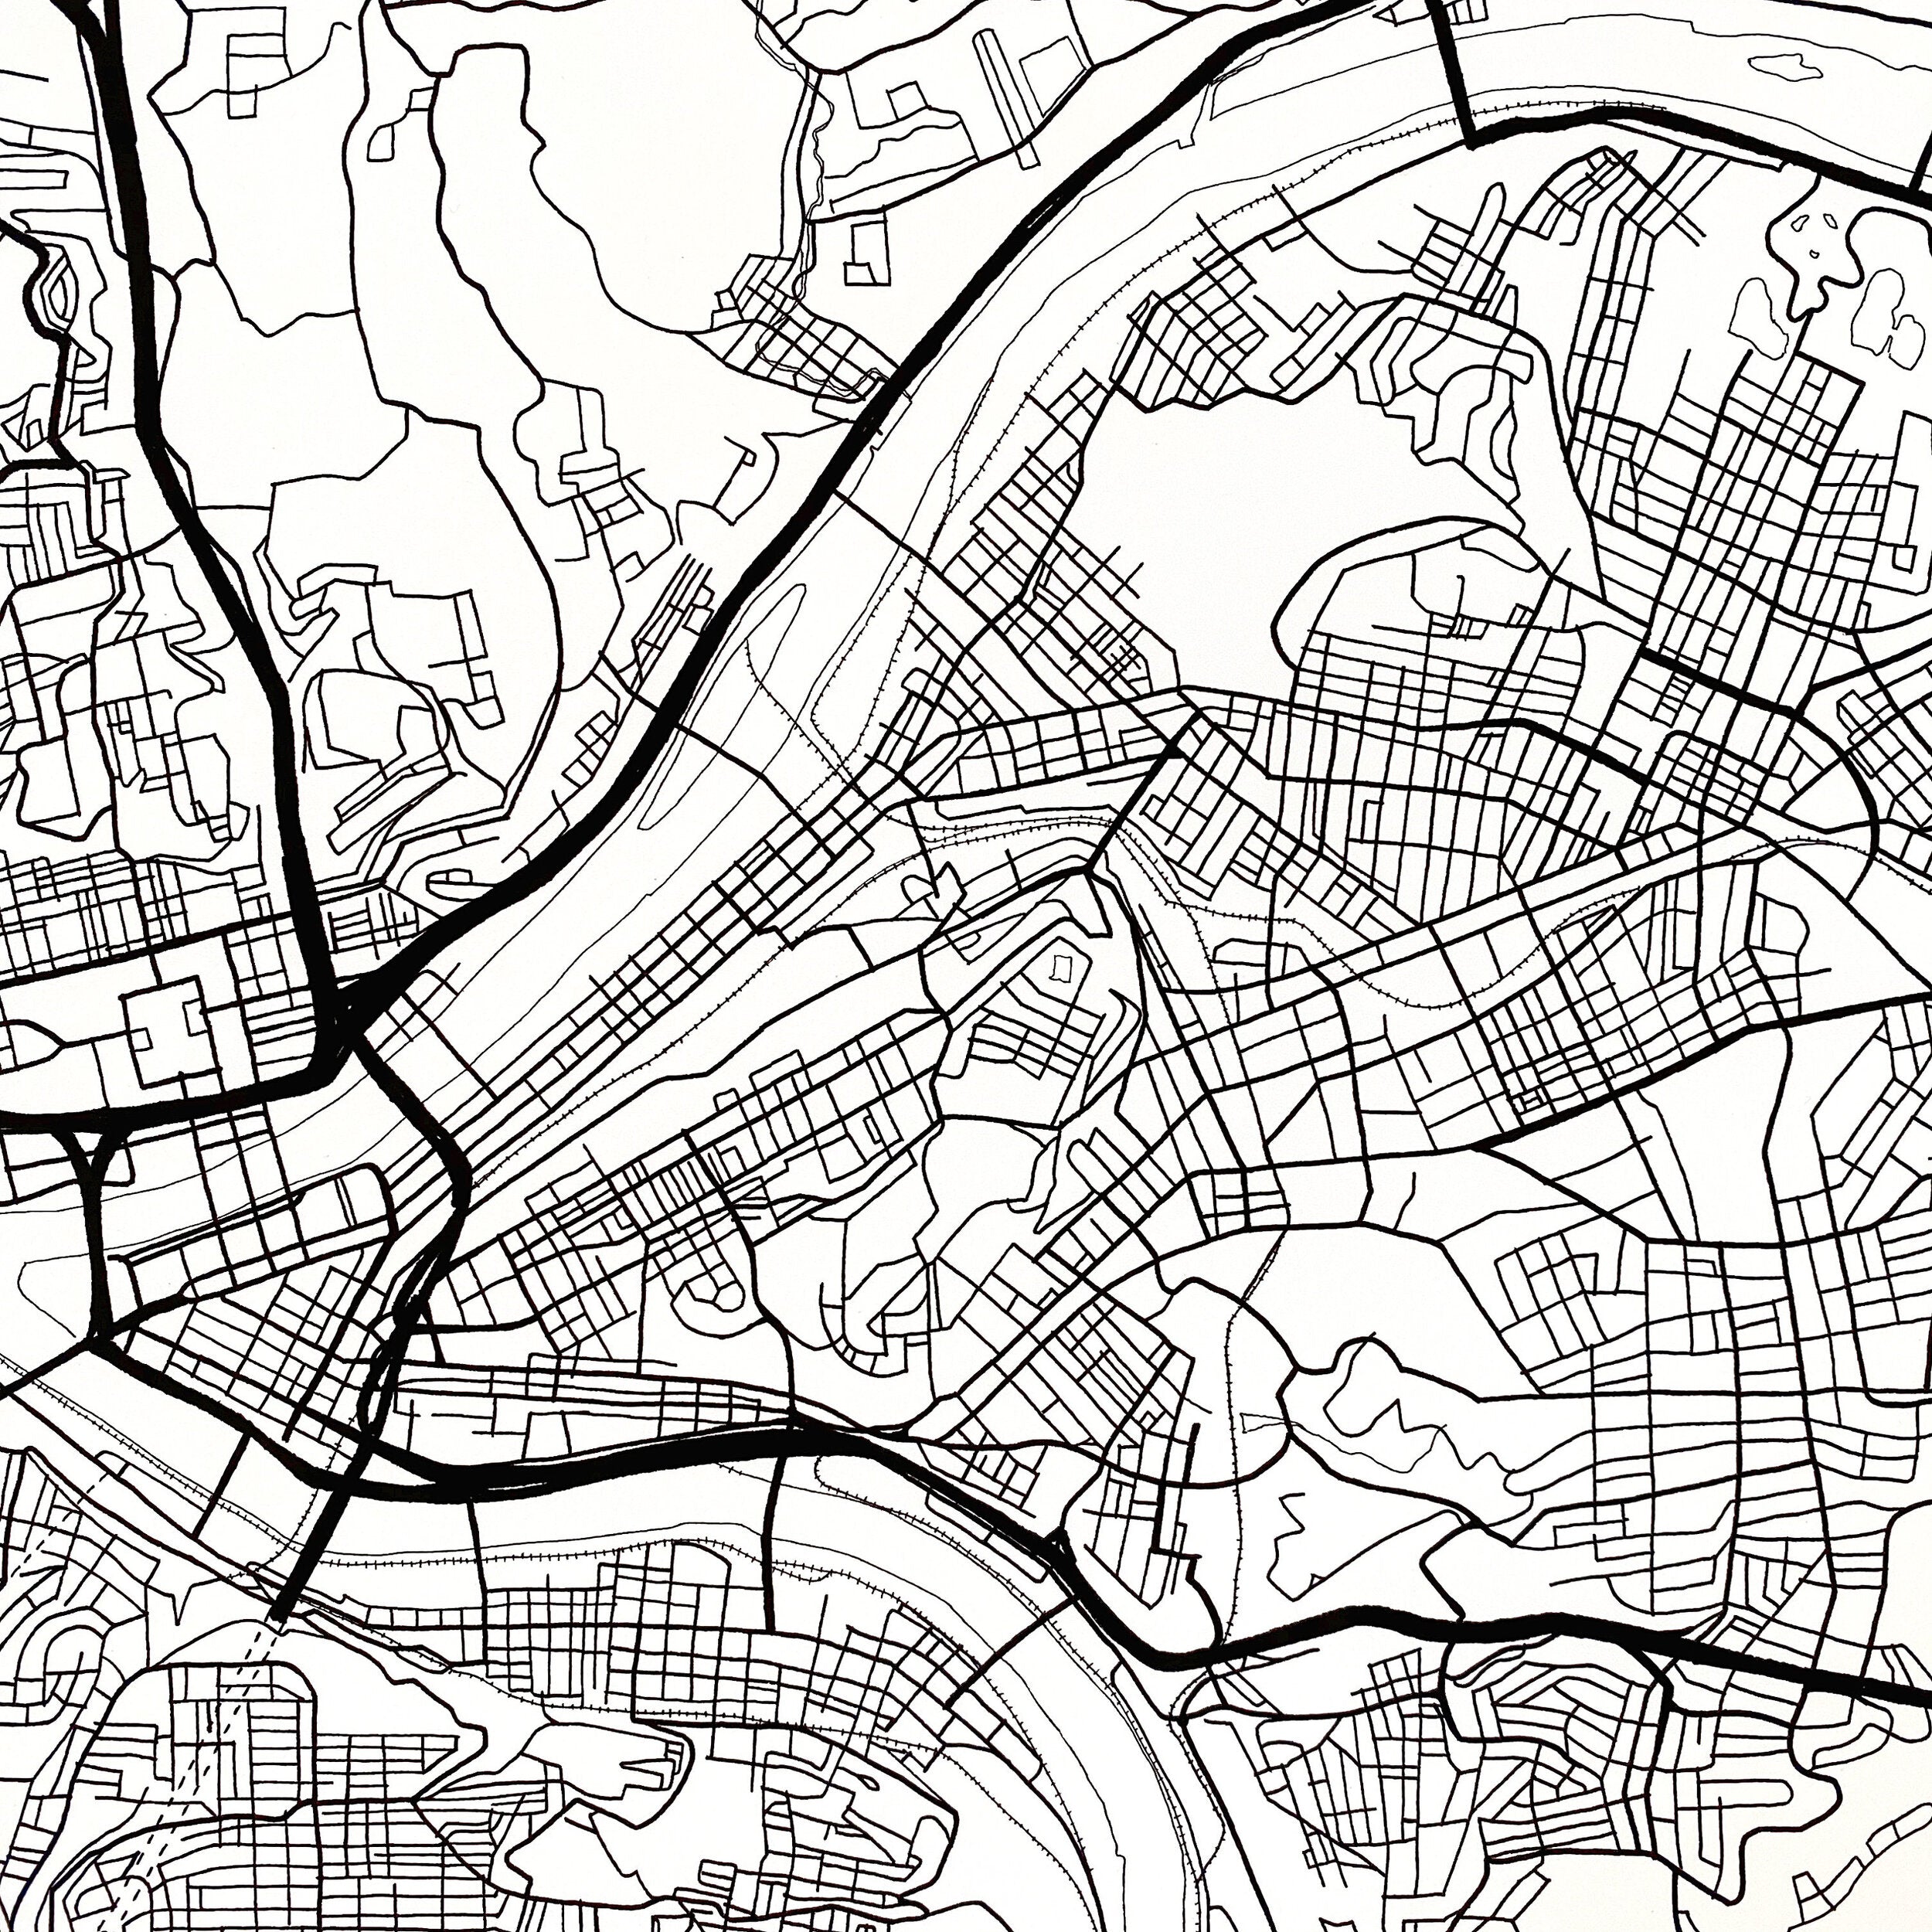 PITTSBURGH City Lines Map: PRINT